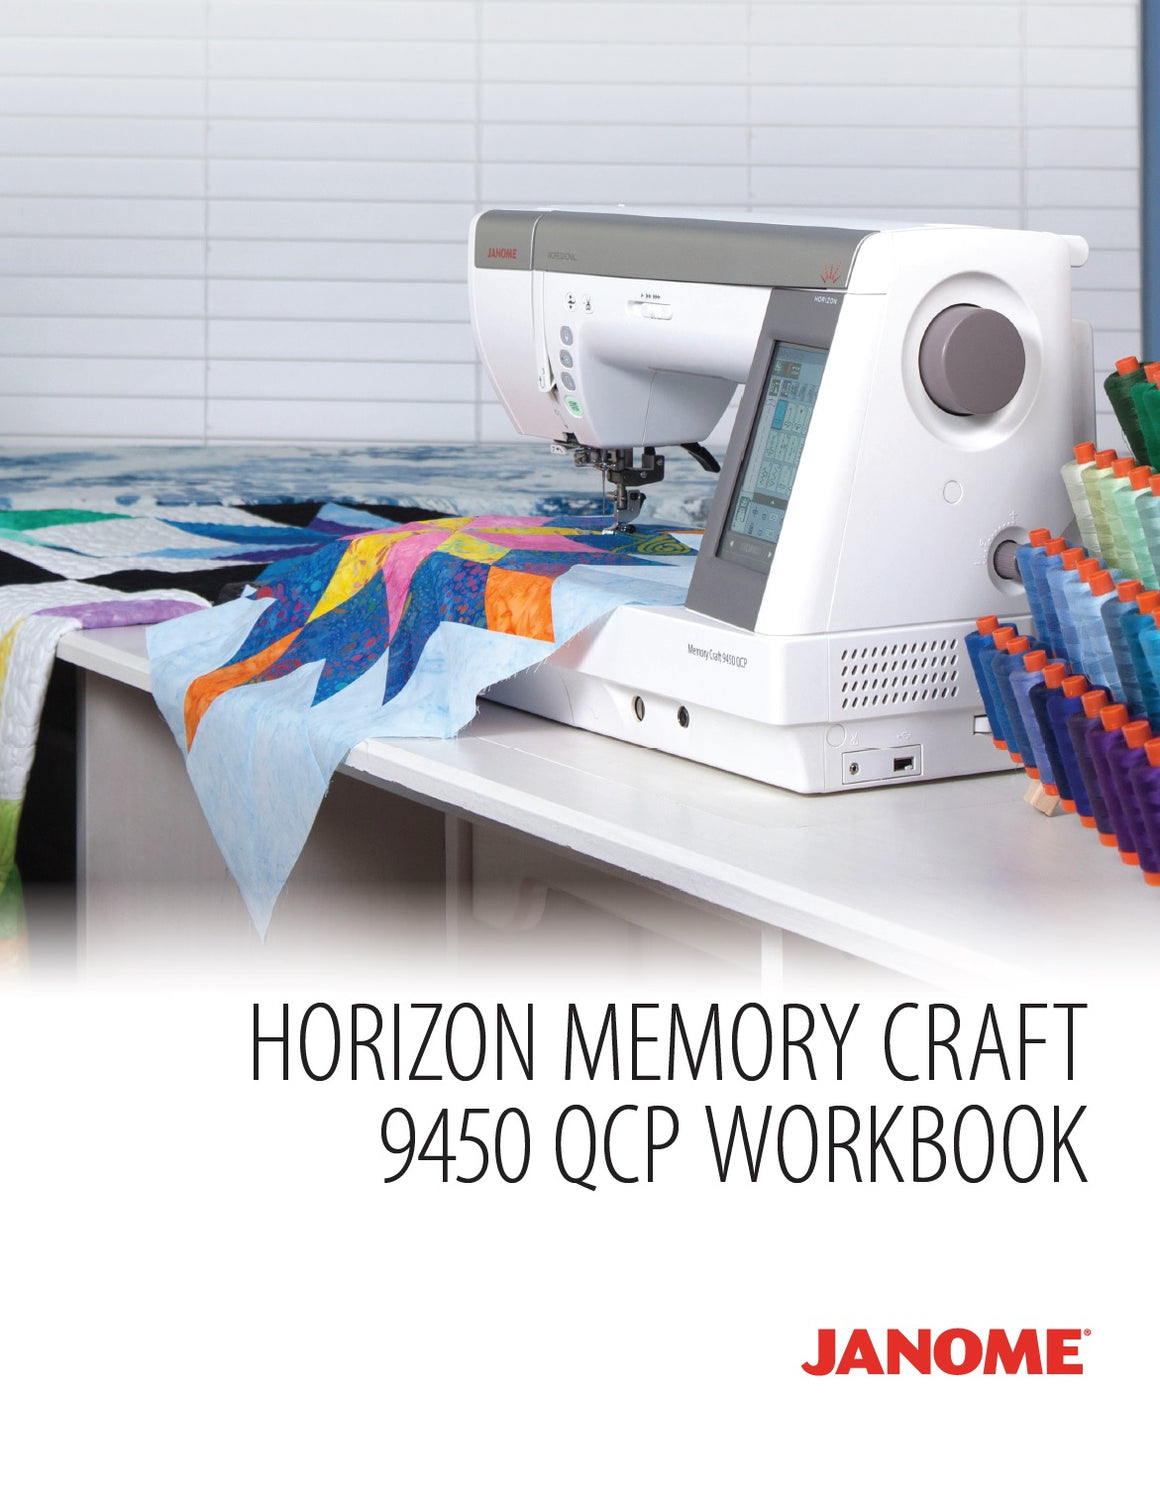 Introduction to the Horizon Memory Craft 9450 QCP Workbook